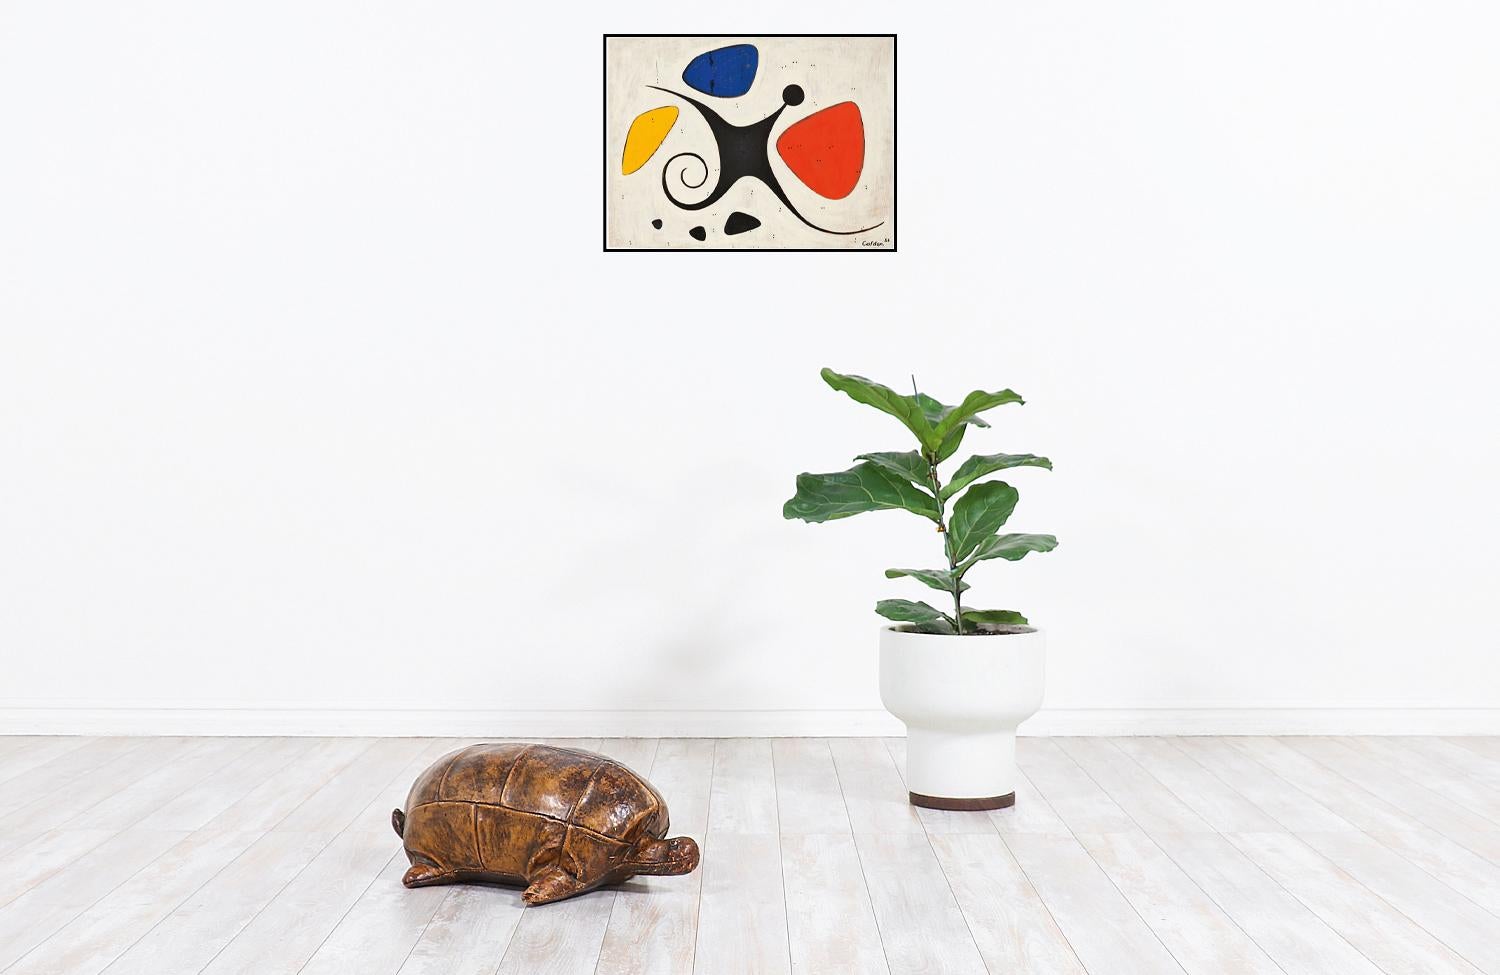 Adorable leather turtle designed by Dimitri Omersa in collaboration by the famous fashion and clothing company Abercrombie and Fitch in England circa 1960s. Originally designed to serve as a footstool, designer Dimitri Omersas’ sculptures are now